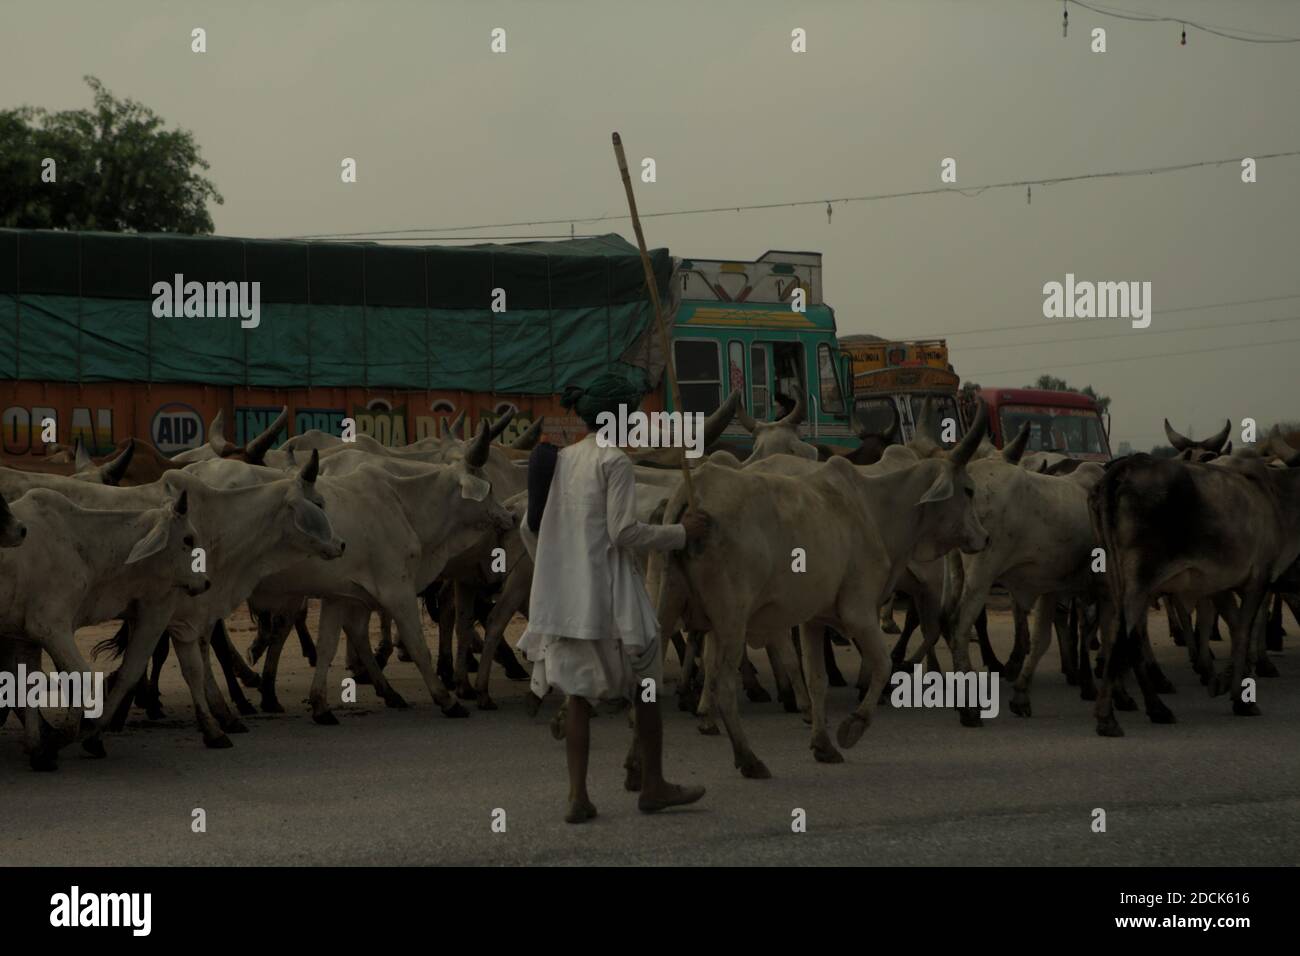 Cow herder walking along with cattle on the side of a road in Rajashtan, India. Stock Photo